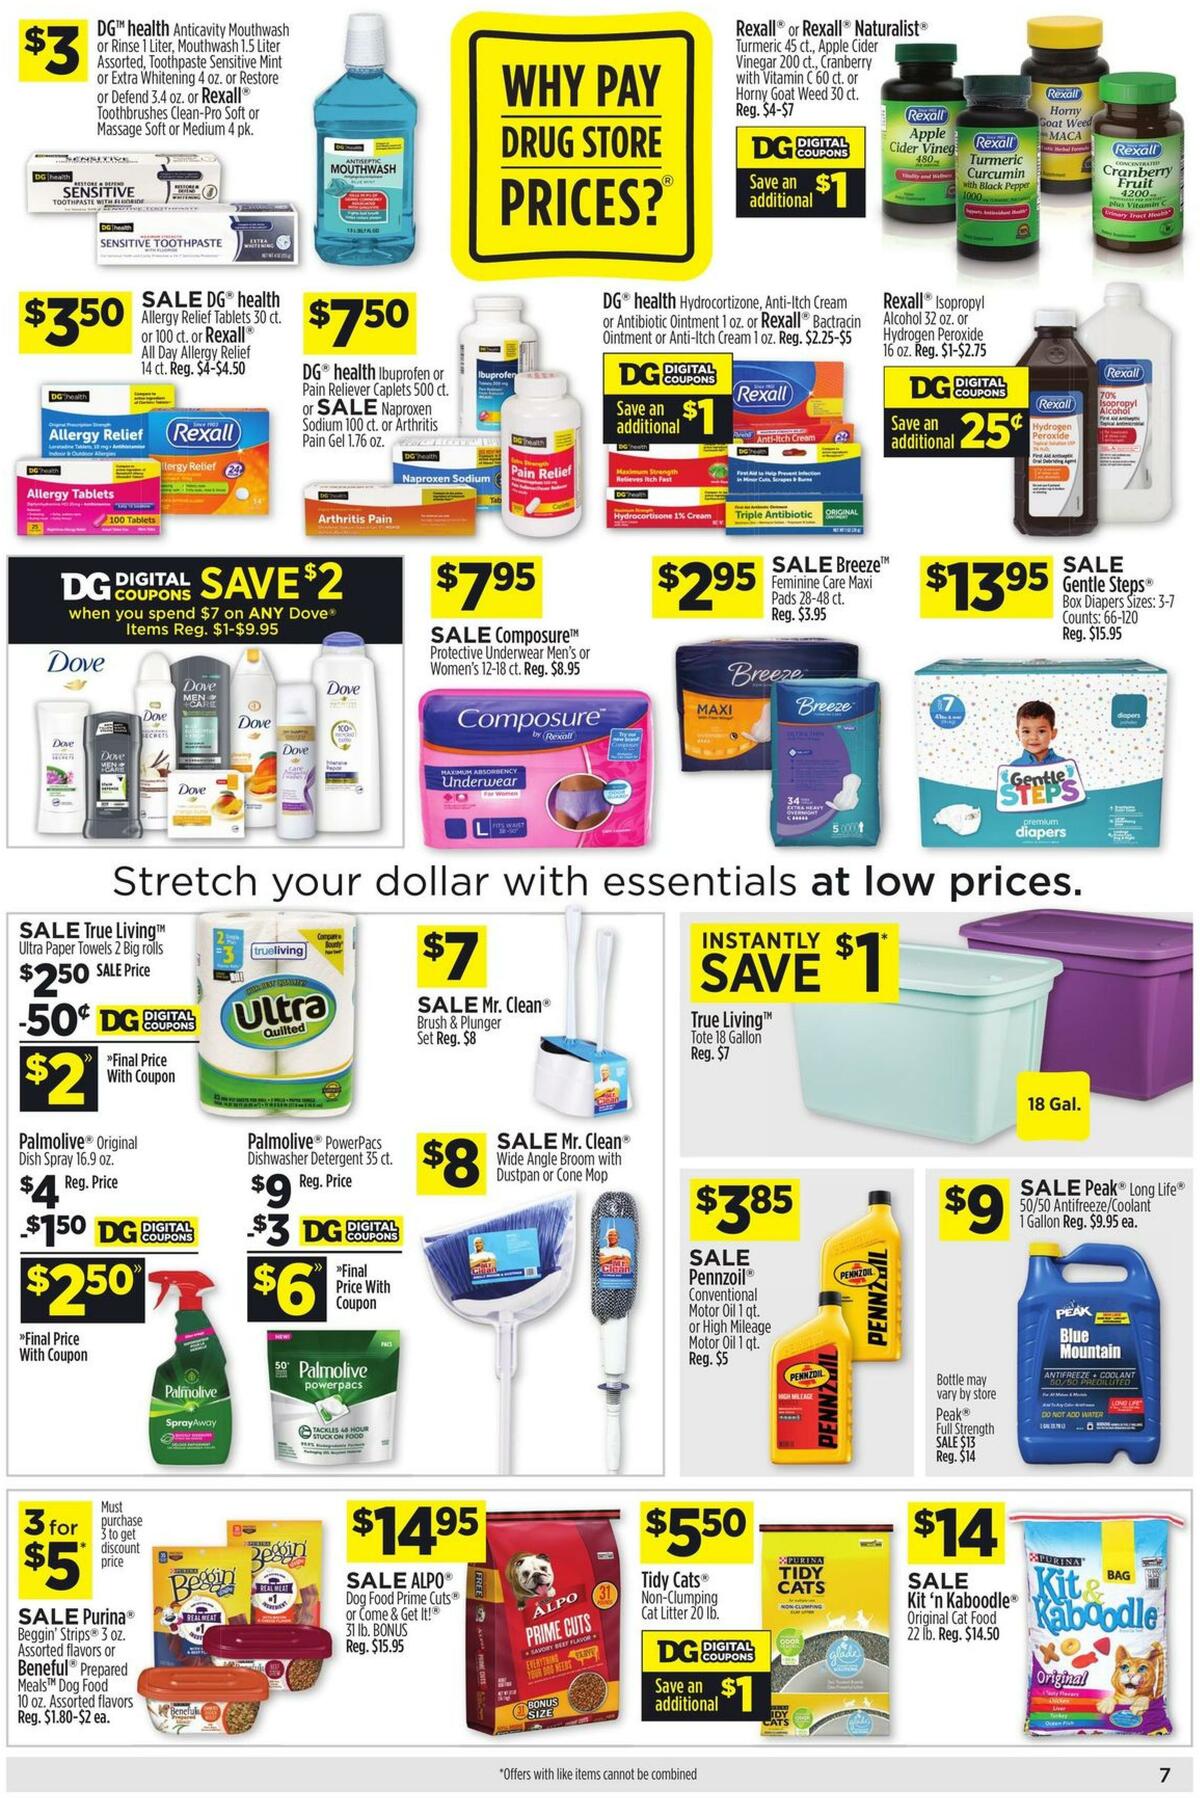 Dollar General Weekly Ad from June 20